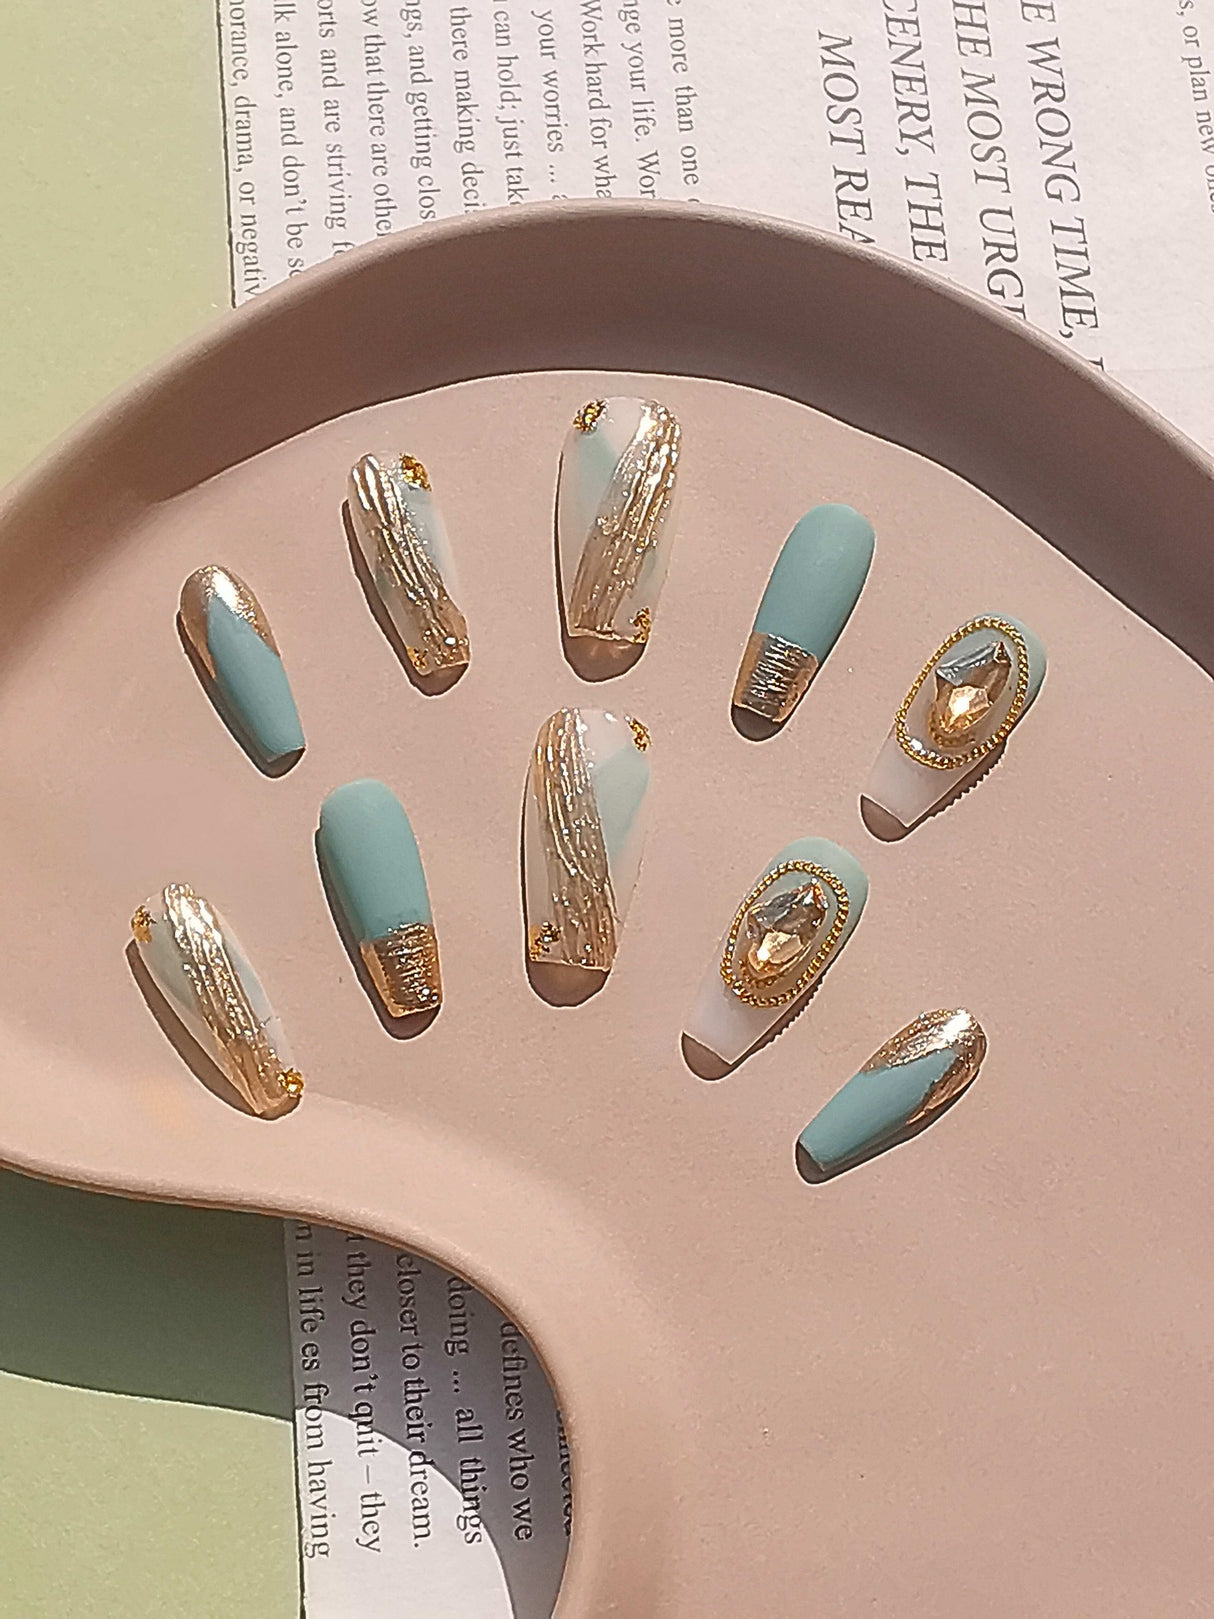 Elaborate and luxurious nails with matte pastel blue color, gold foil/glitter tips, and gold frames with white/clear stones for fashion statements or special occasions.